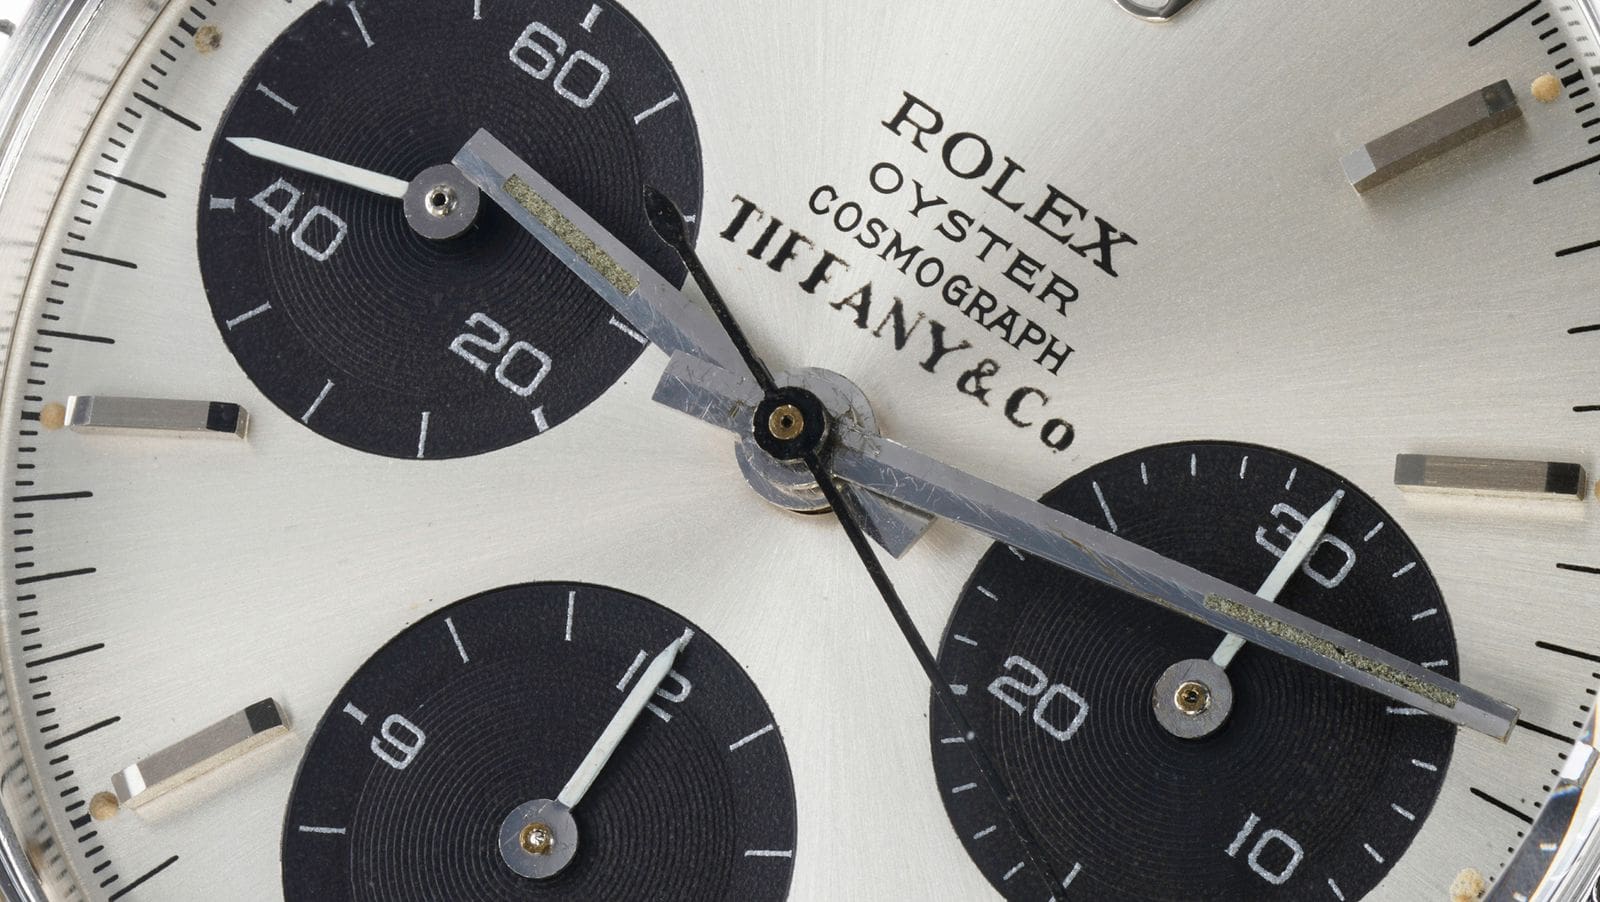 RECOMMENDED READING: Why double-signed Rolex and Patek Philippe dials are so interesting